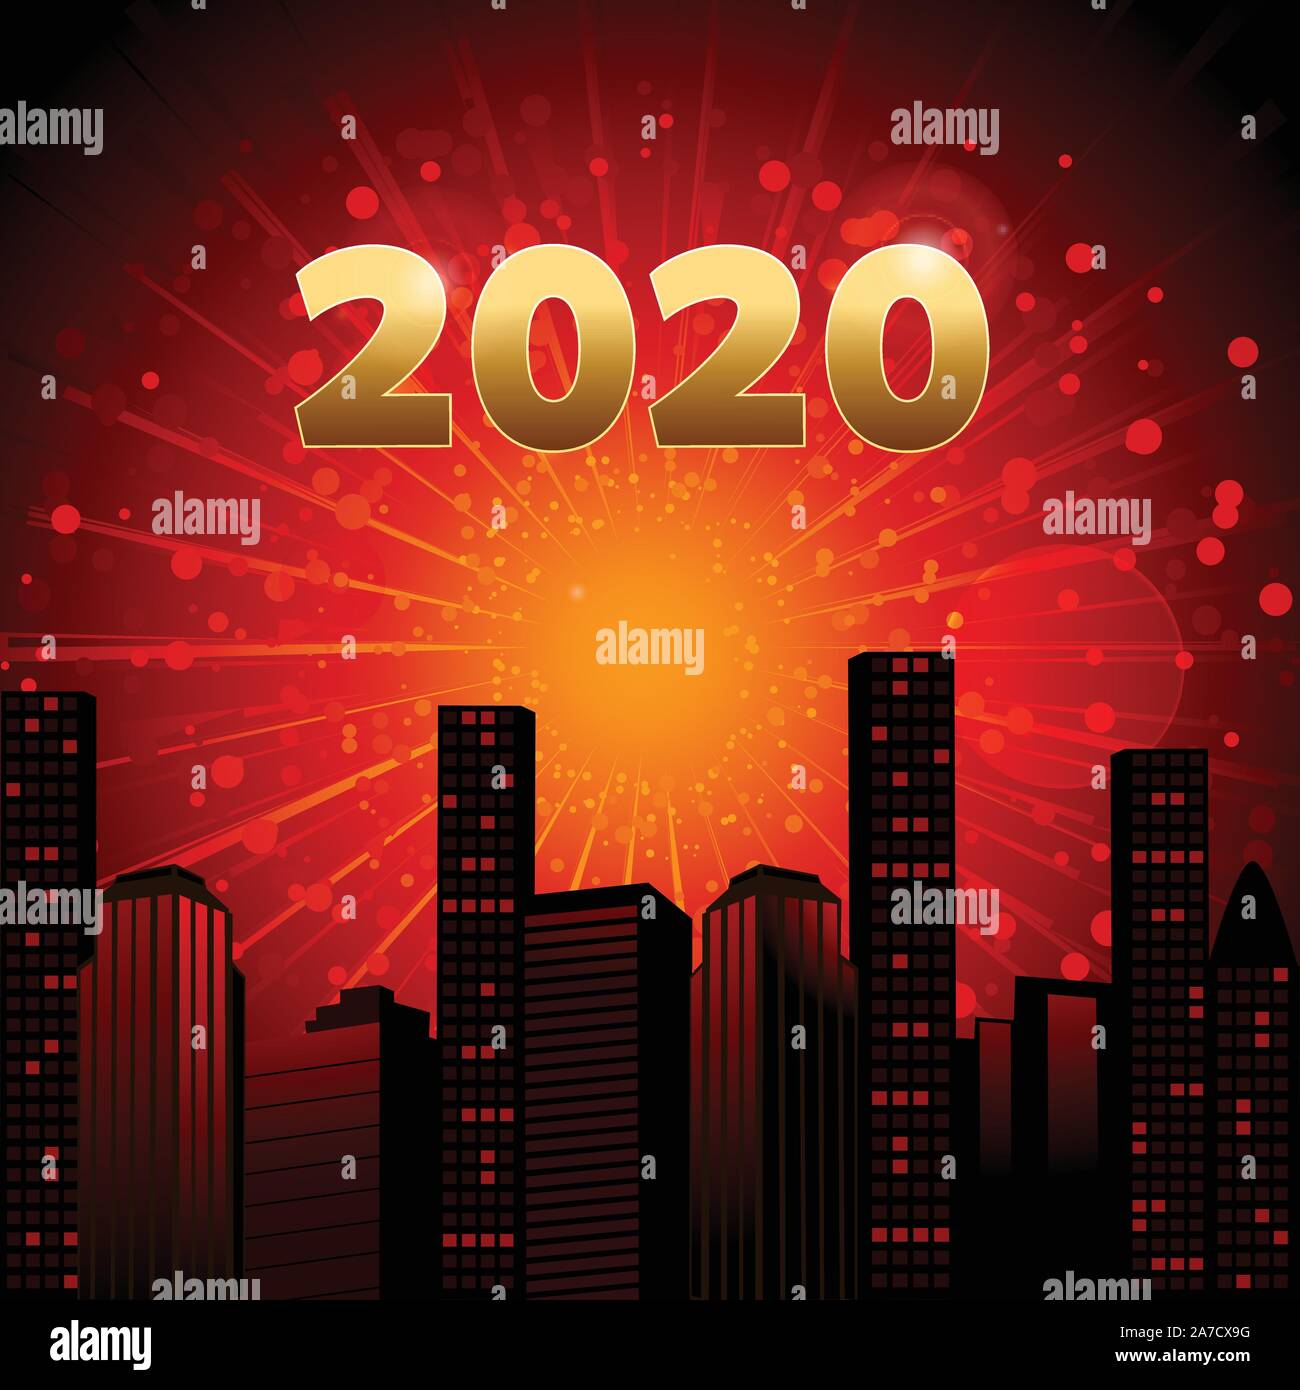 2020 Celebration Red And Yellow Background With Abstract Cityscape Date And Starburst Stock Vector